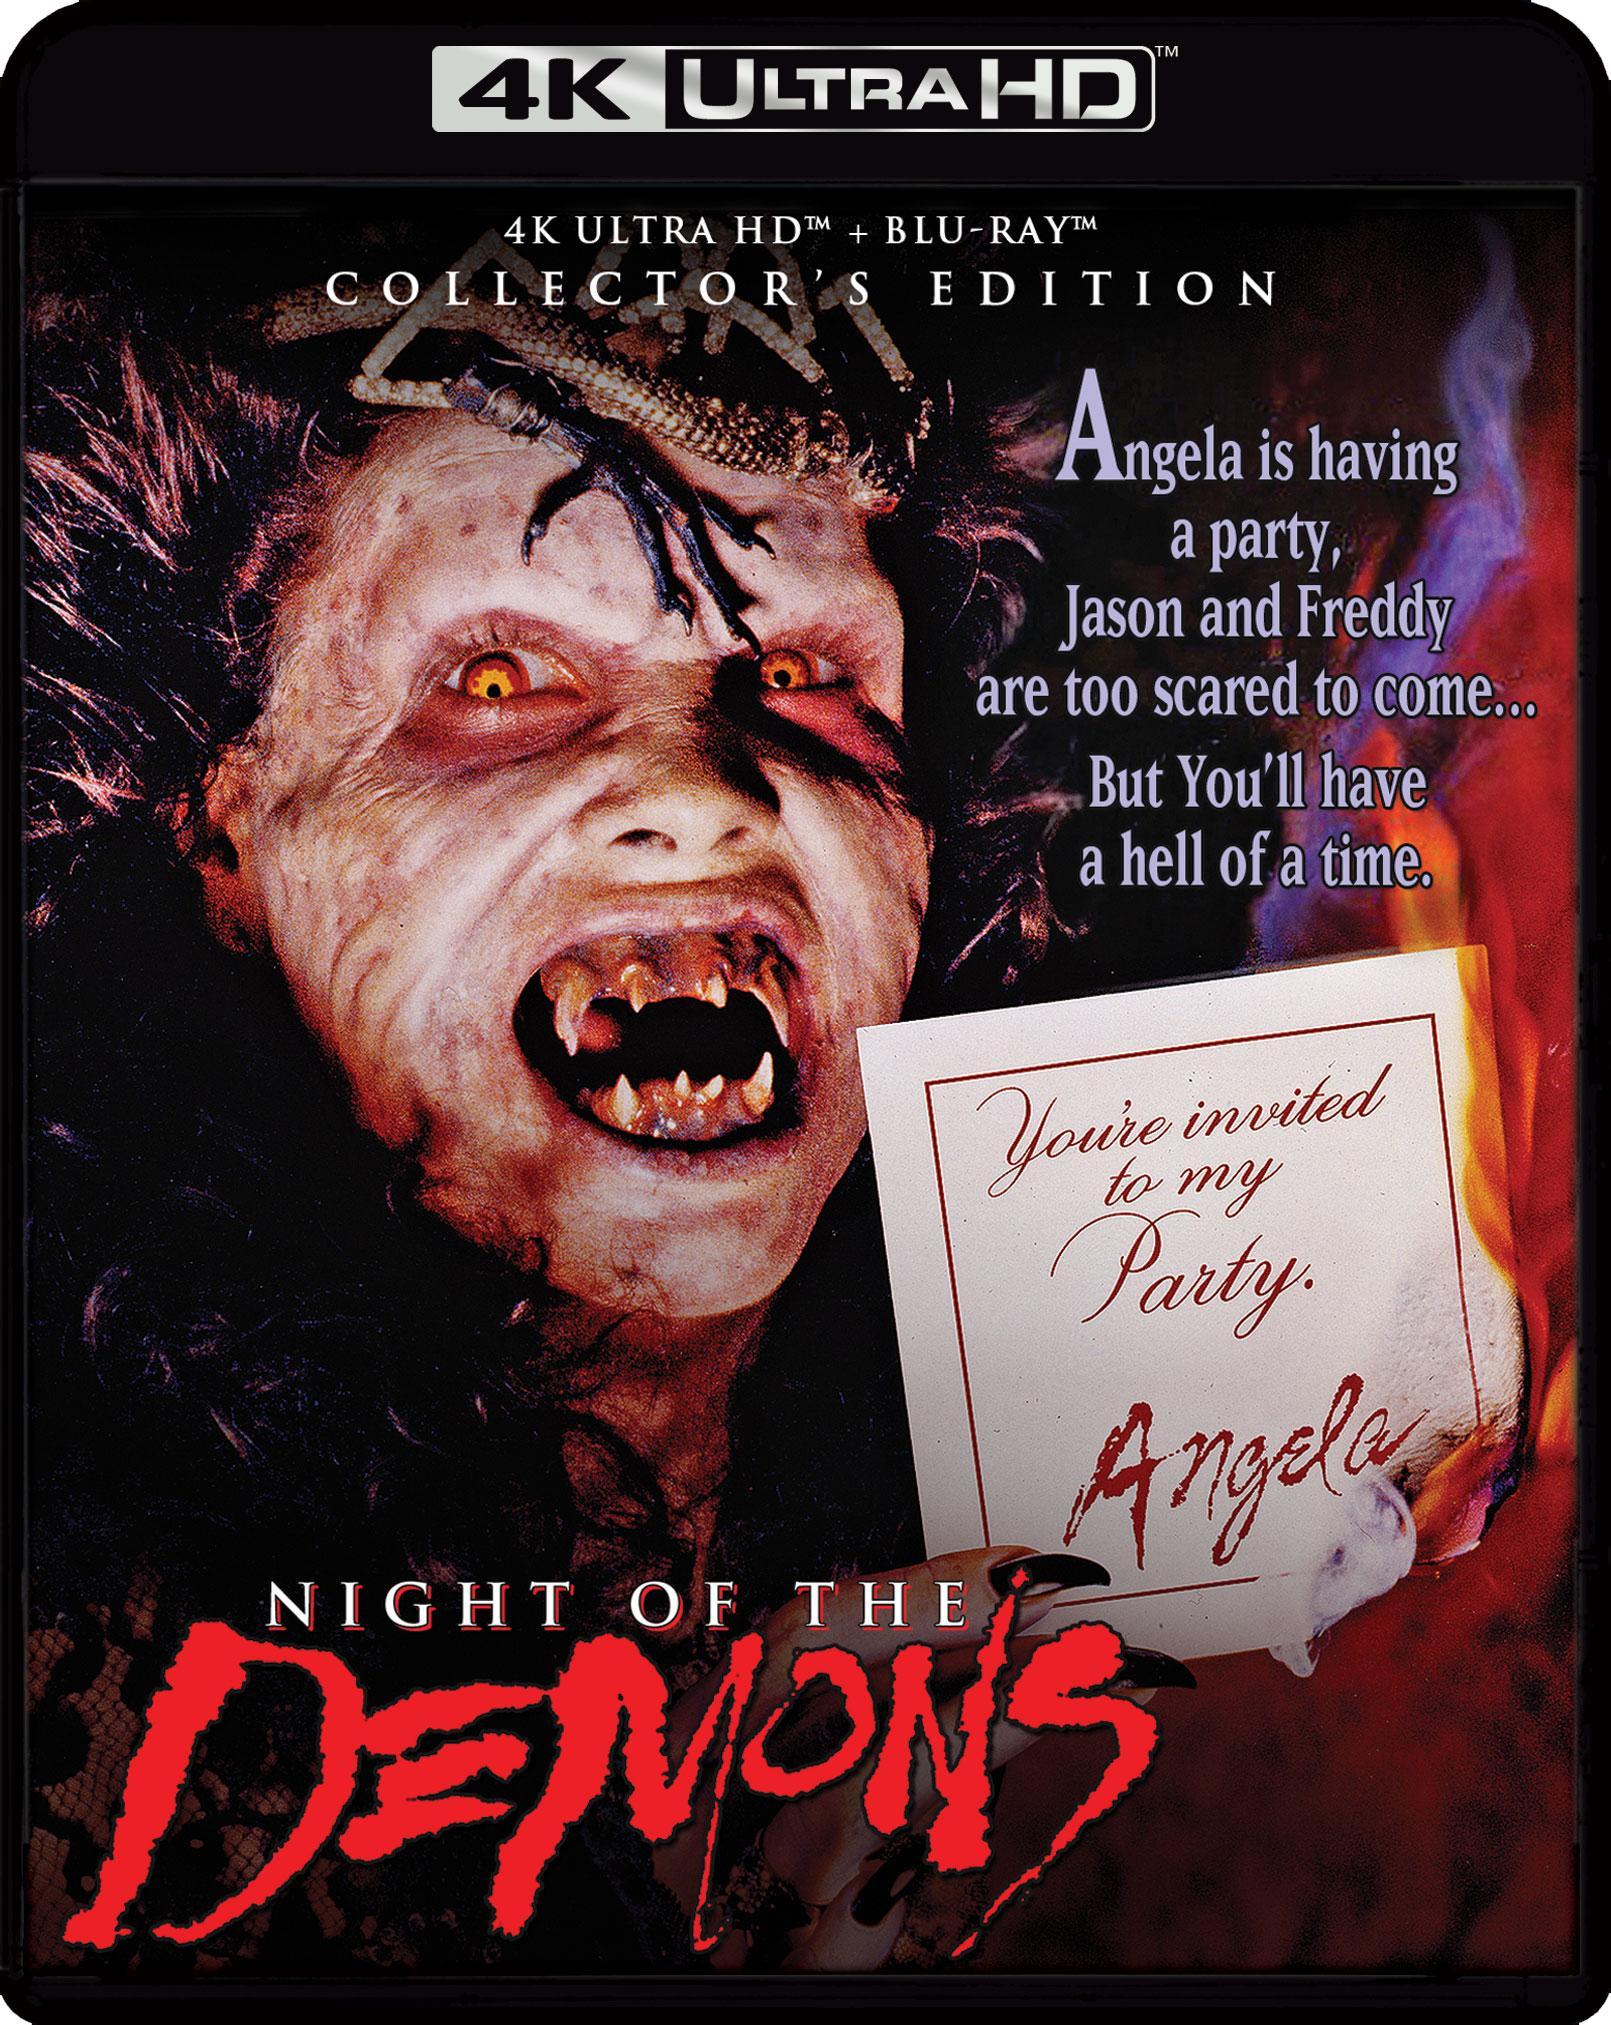 Night of the Demons (1988) (Collector's Edition) (4K Ultra HD + Blu-ray) - image 3 of 3